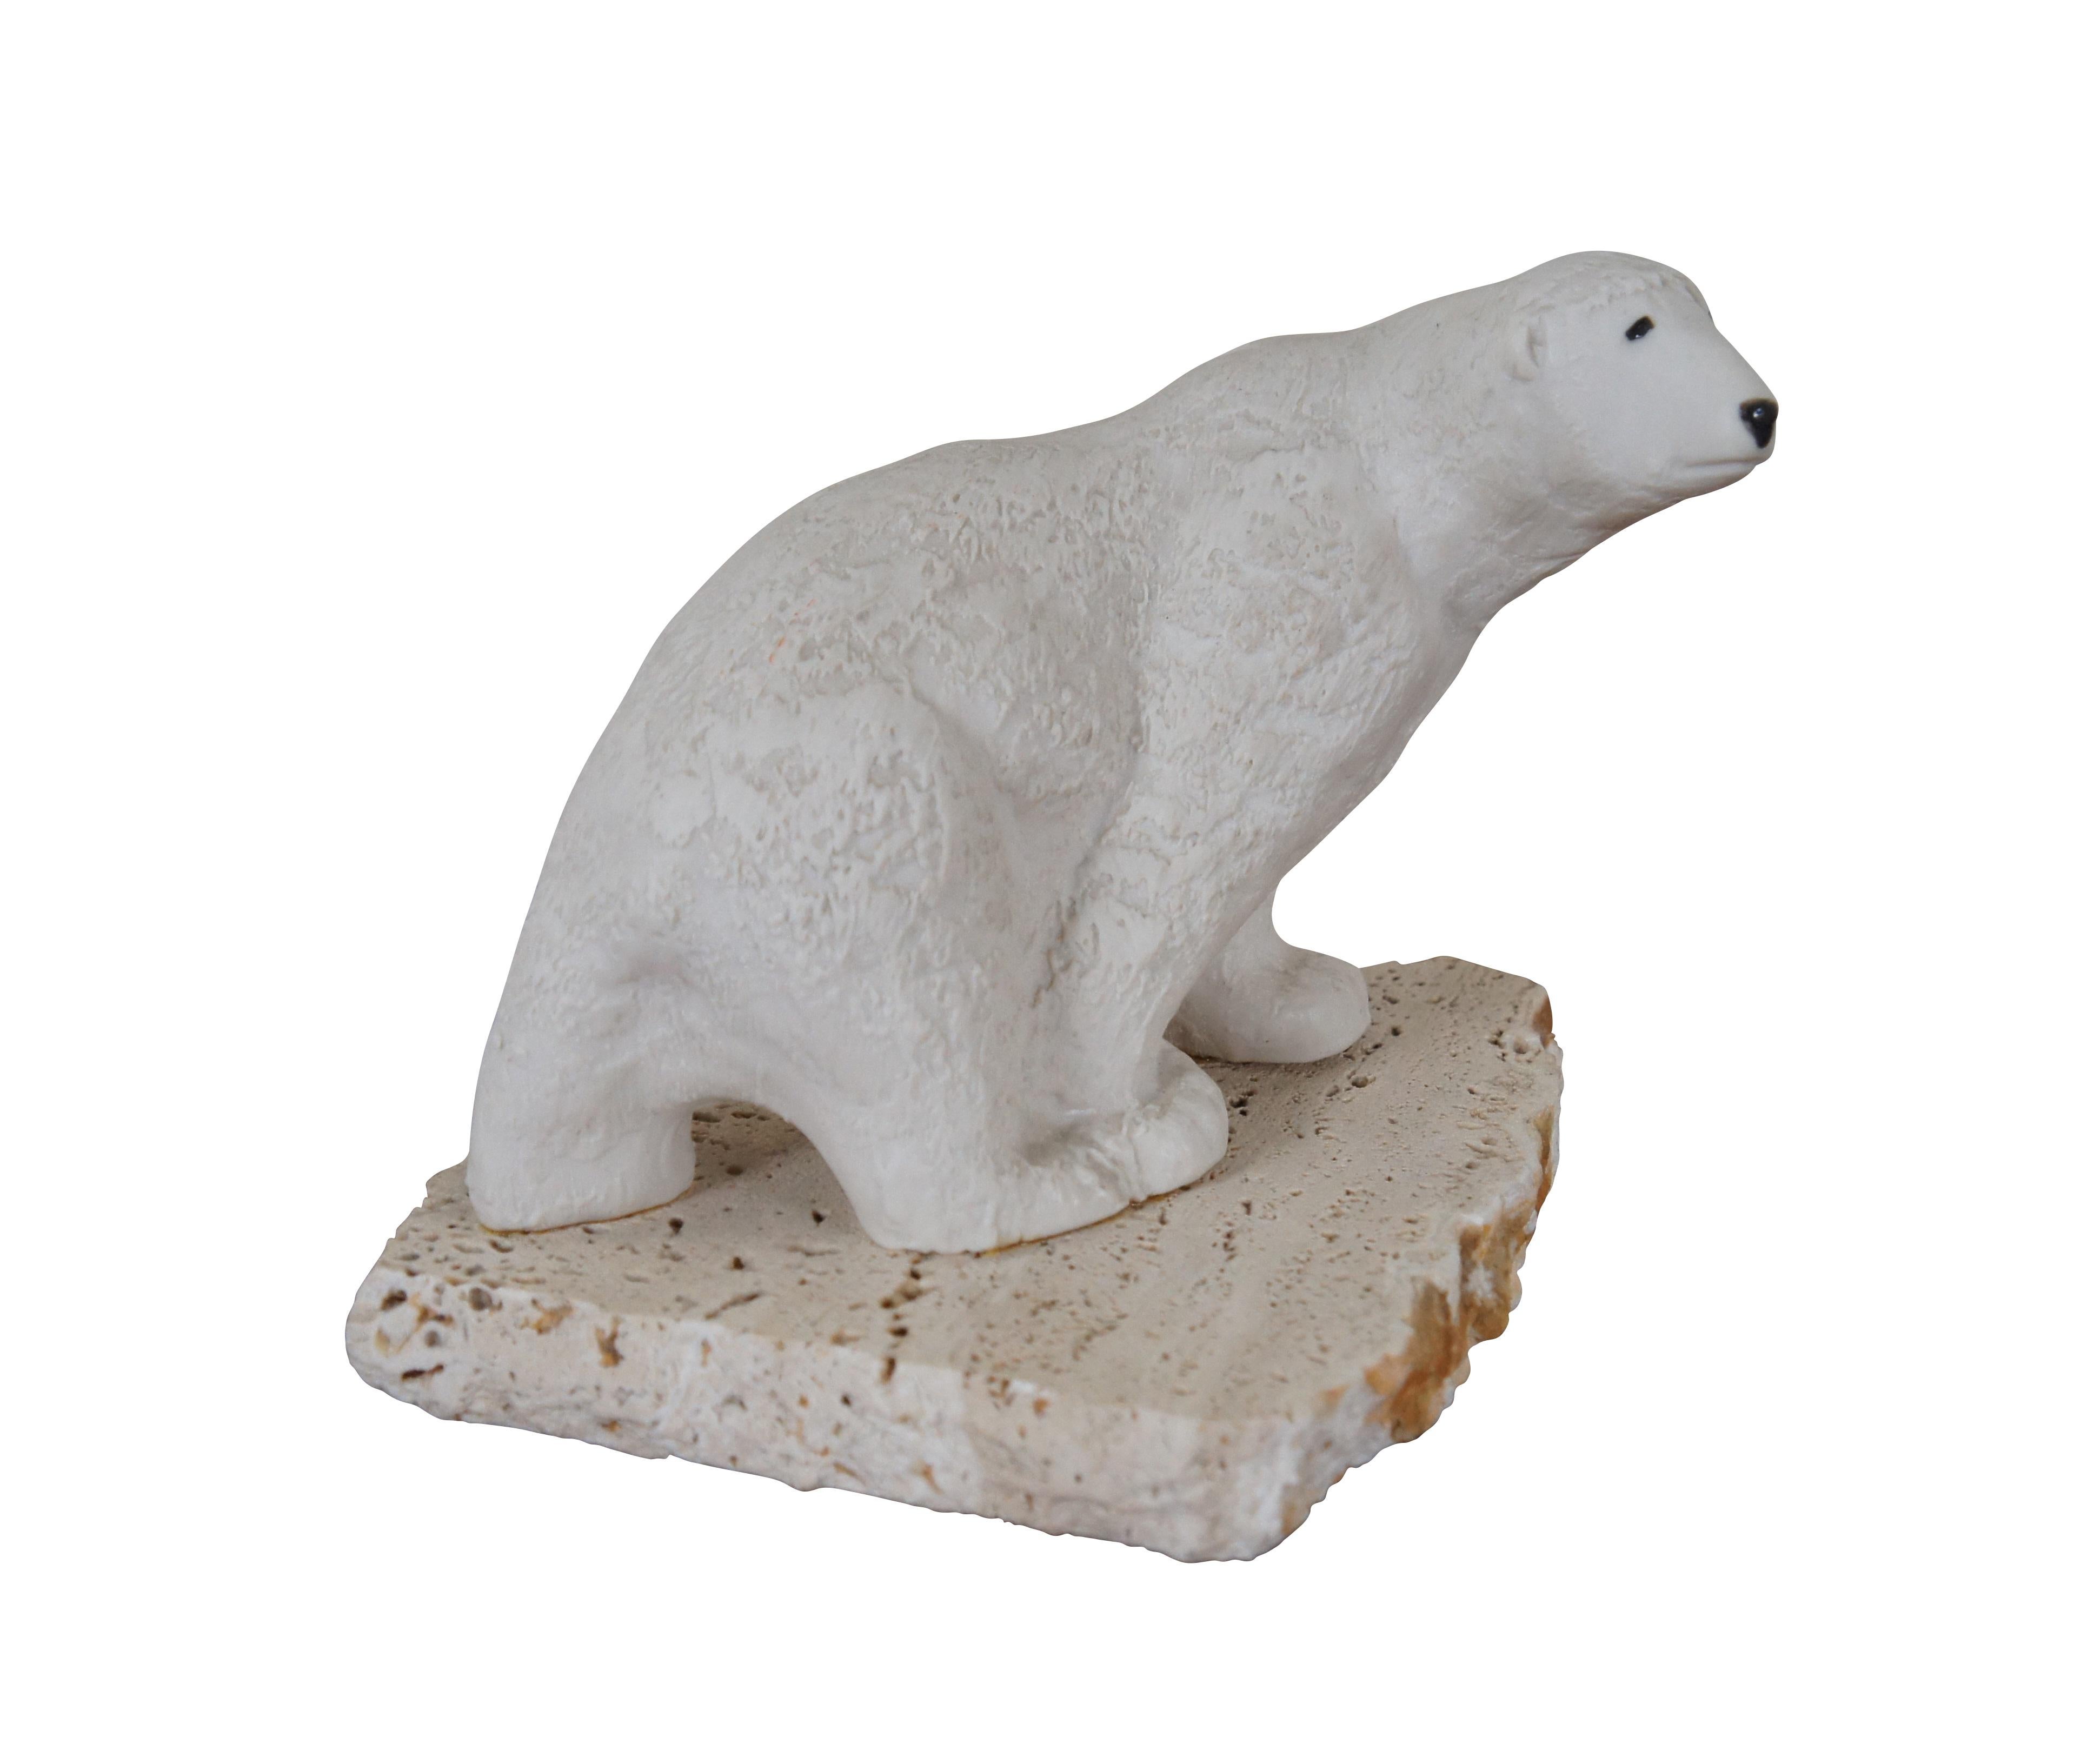 Mid century Maigon Daga Polar Bear art scupture figurine or paperweight.  Made of ceramic and stone, purchased at Wiley's, Wayne Plaza, Dayton, Ohio.

MAIGONIS ‘MIKE’ DAGA (1923-2001) was born in Riga, Latvia, and immigrated to Australia in1948 as a